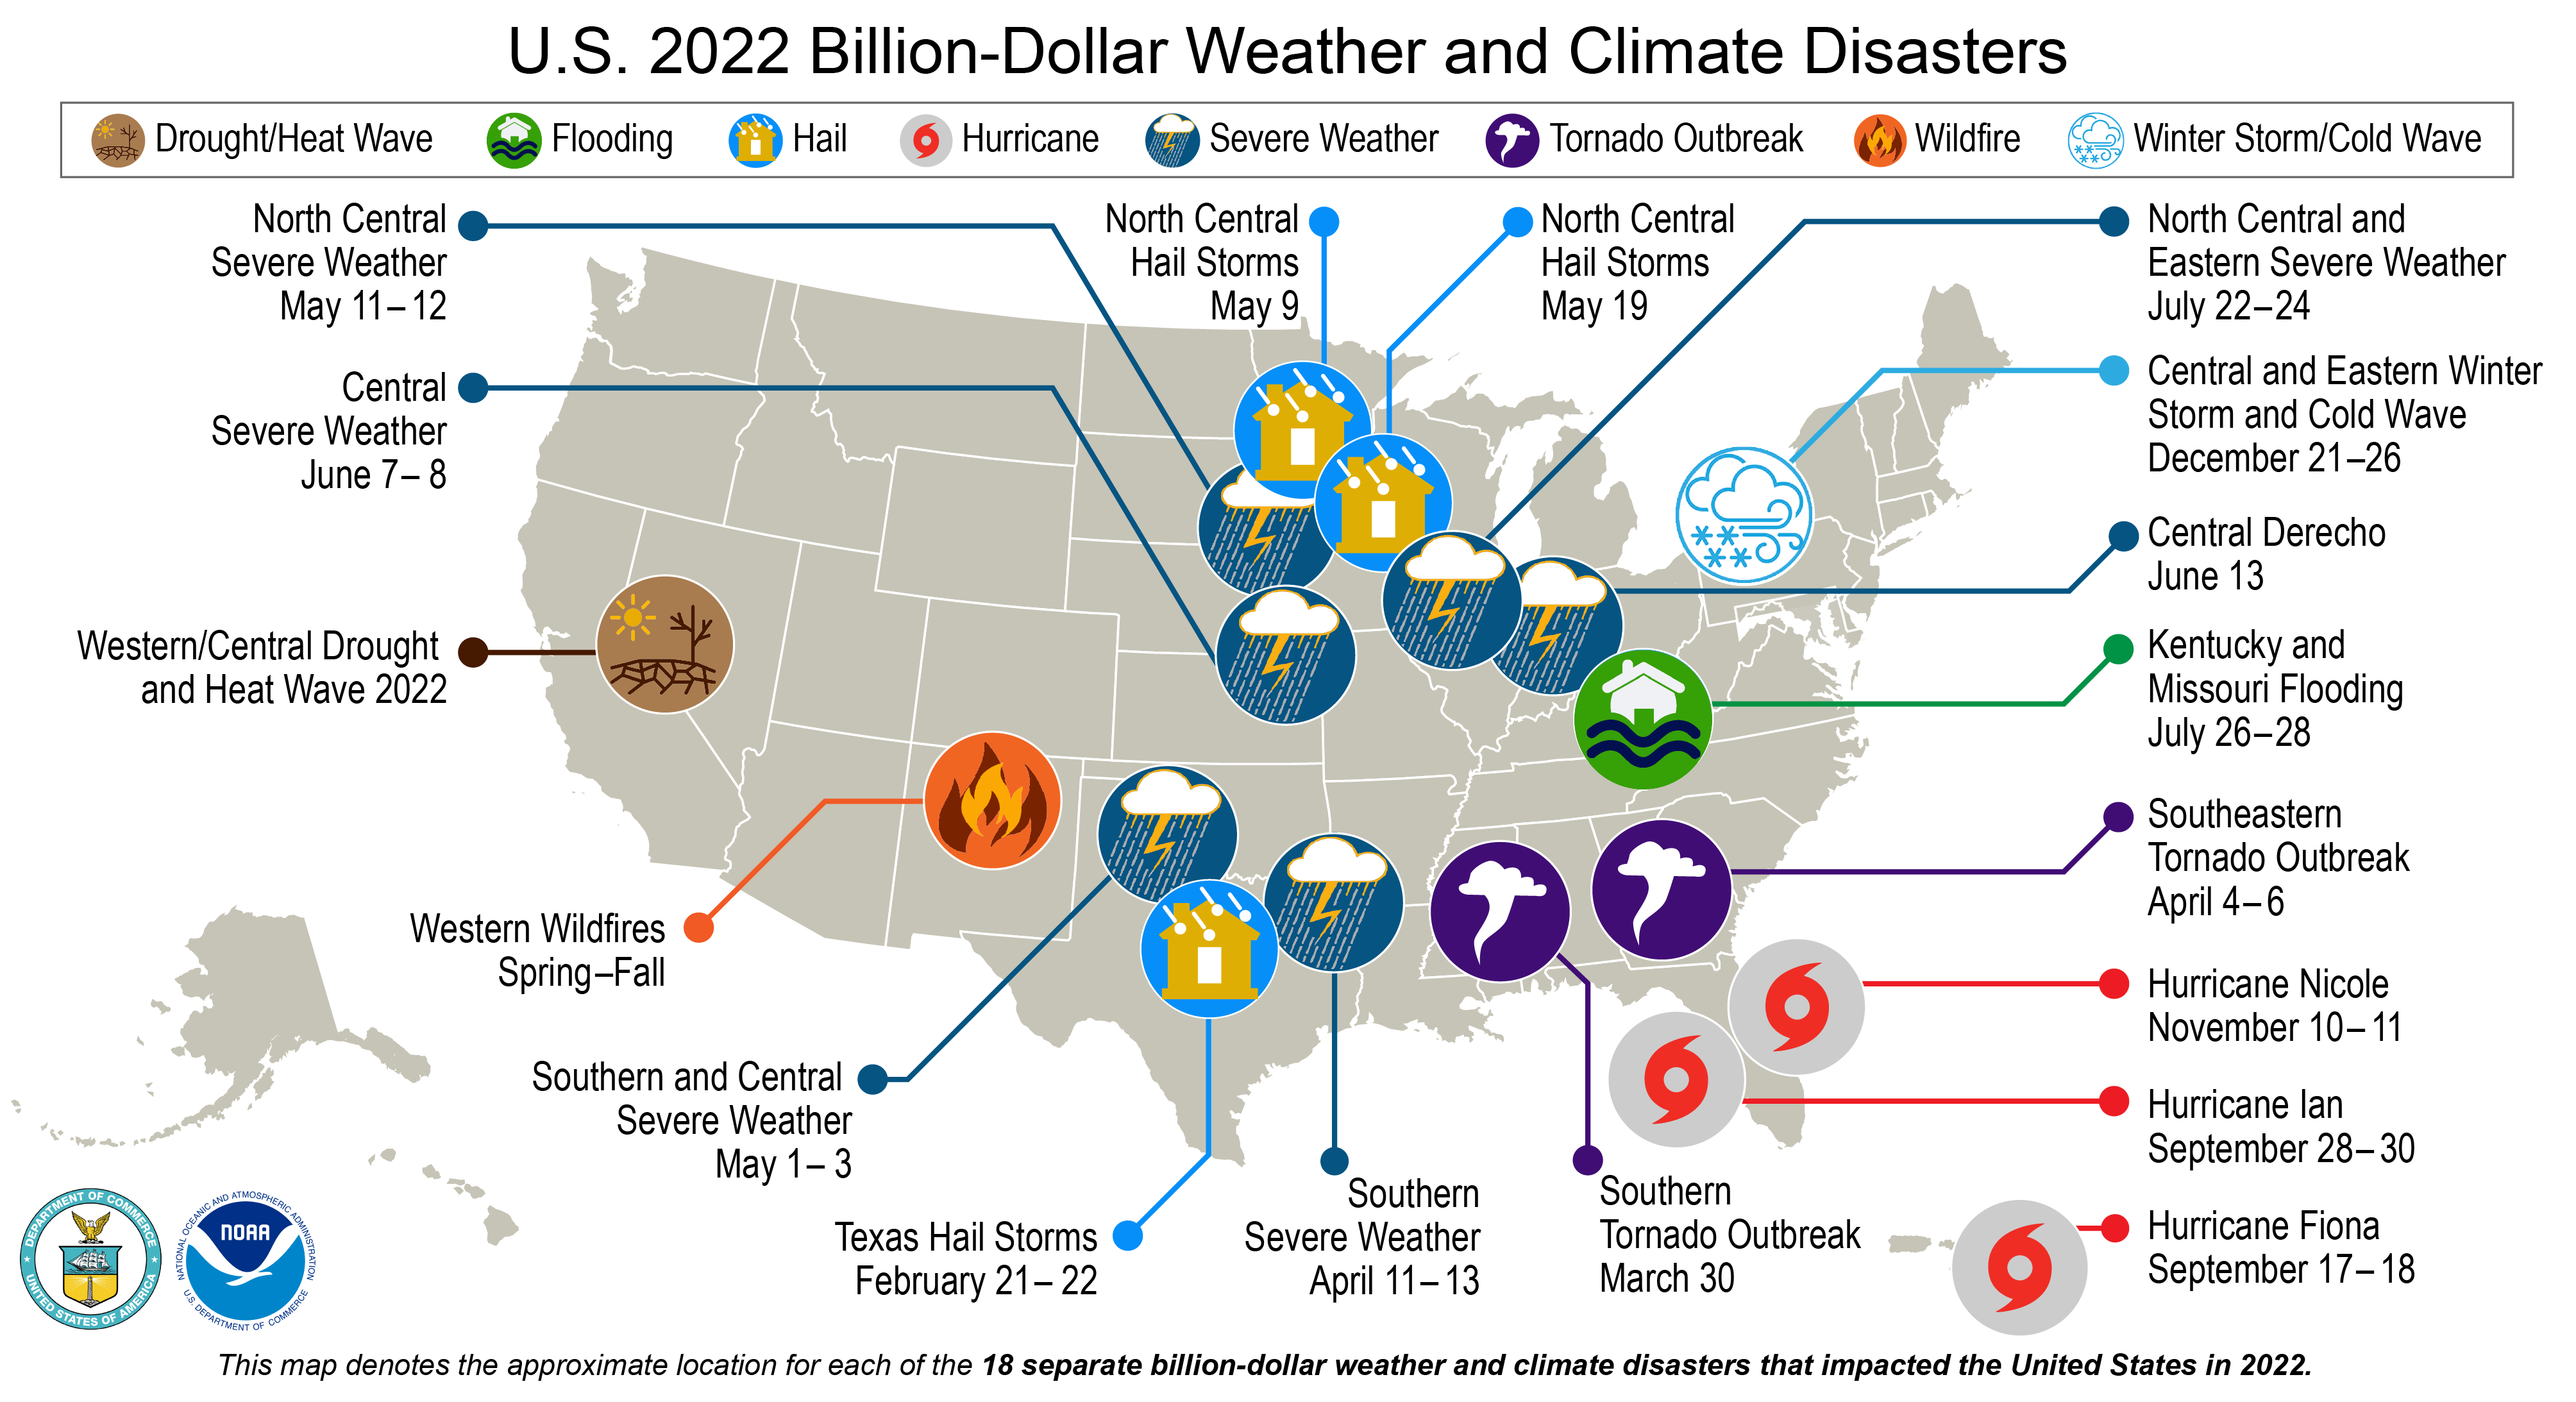 Map of the U.S. plotted with 18 separate billion dollar disasters that occurred in 2022.